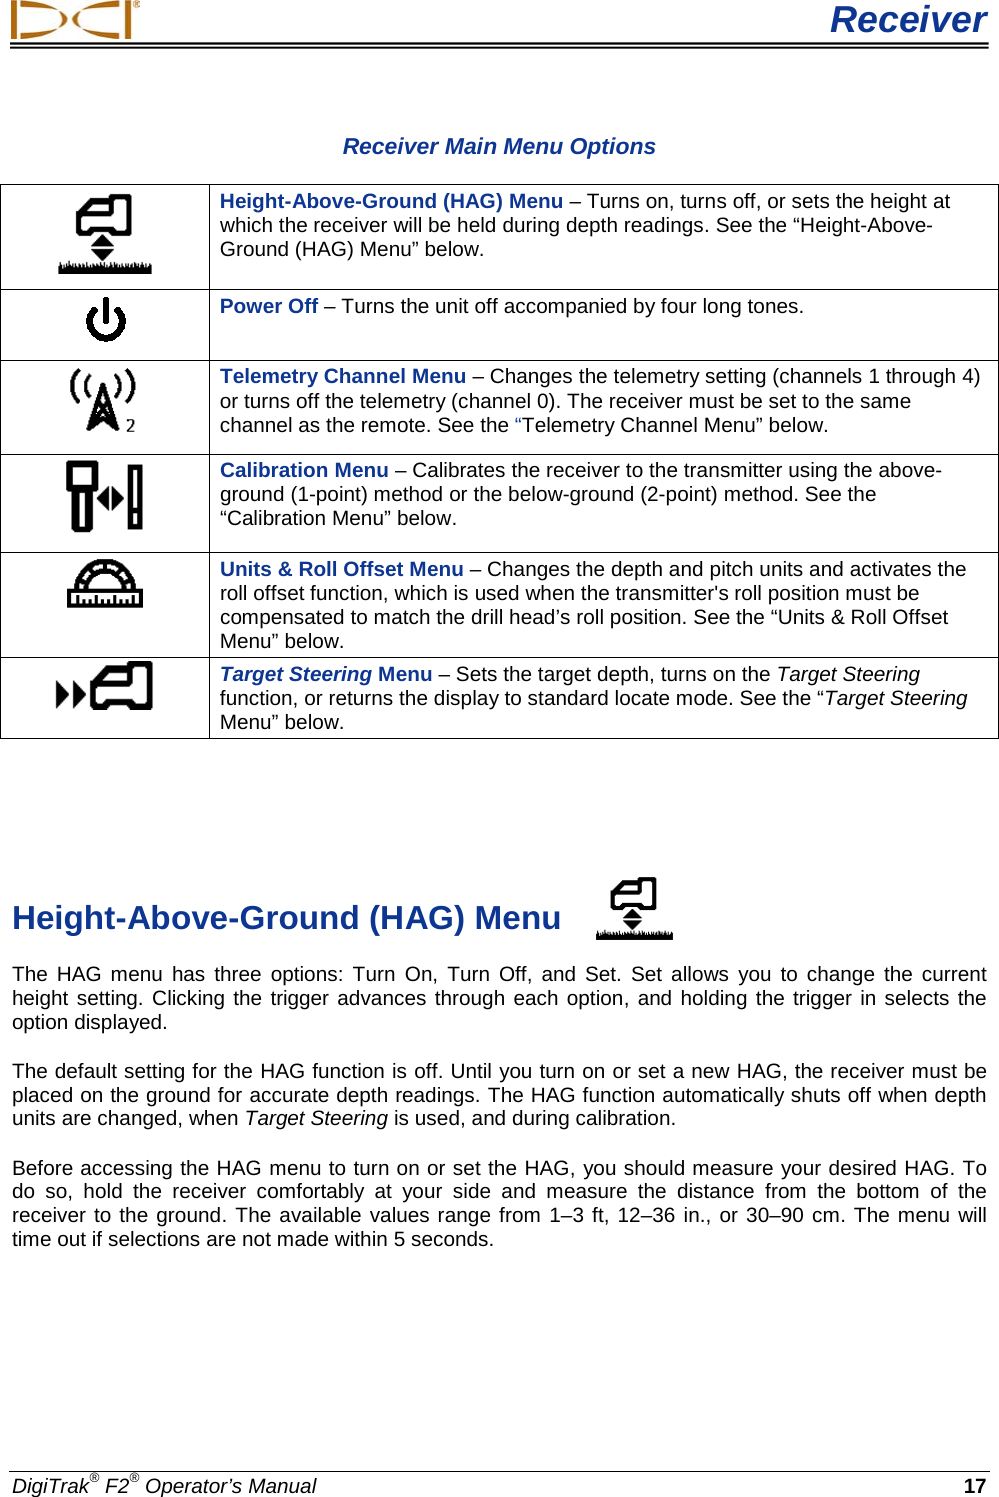  Receiver DigiTrak® F2® Operator’s Manual 17 Receiver Main Menu Options  Height-Above-Ground (HAG) Menu – Turns on, turns off, or sets the height at which the receiver will be held during depth readings. See the “Height-Above-Ground (HAG) Menu” below.  Power Off – Turns the unit off accompanied by four long tones.   Telemetry Channel Menu – Changes the telemetry setting (channels 1 through 4) or turns off the telemetry (channel 0). The receiver must be set to the same channel as the remote. See the “Telemetry Channel Menu” below.  Calibration Menu – Calibrates the receiver to the transmitter using the above-ground (1-point) method or the below-ground (2-point) method. See the “Calibration Menu” below.  Units &amp; Roll Offset Menu – Changes the depth and pitch units and activates the roll offset function, which is used when the transmitter&apos;s roll position must be compensated to match the drill head’s roll position. See the “Units &amp; Roll Offset Menu” below.  Target Steering Menu – Sets the target depth, turns on the Target Steering function, or returns the display to standard locate mode. See the “Target Steering Menu” below.    Height-Above-Ground (HAG) Menu The HAG menu has three options: Turn  On, Turn Off, and Set.  Set allows you to change the current height setting. Clicking the trigger advances through each option, and holding the trigger in selects the option displayed.  The default setting for the HAG function is off. Until you turn on or set a new HAG, the receiver must be placed on the ground for accurate depth readings. The HAG function automatically shuts off when depth units are changed, when Target Steering is used, and during calibration. Before accessing the HAG menu to turn on or set the HAG, you should measure your desired HAG. To do so, hold the receiver comfortably at your side and measure the distance from the bottom of the receiver to the ground. The available values range from 1–3 ft, 12–36 in., or 30–90 cm. The menu will time out if selections are not made within 5 seconds. 